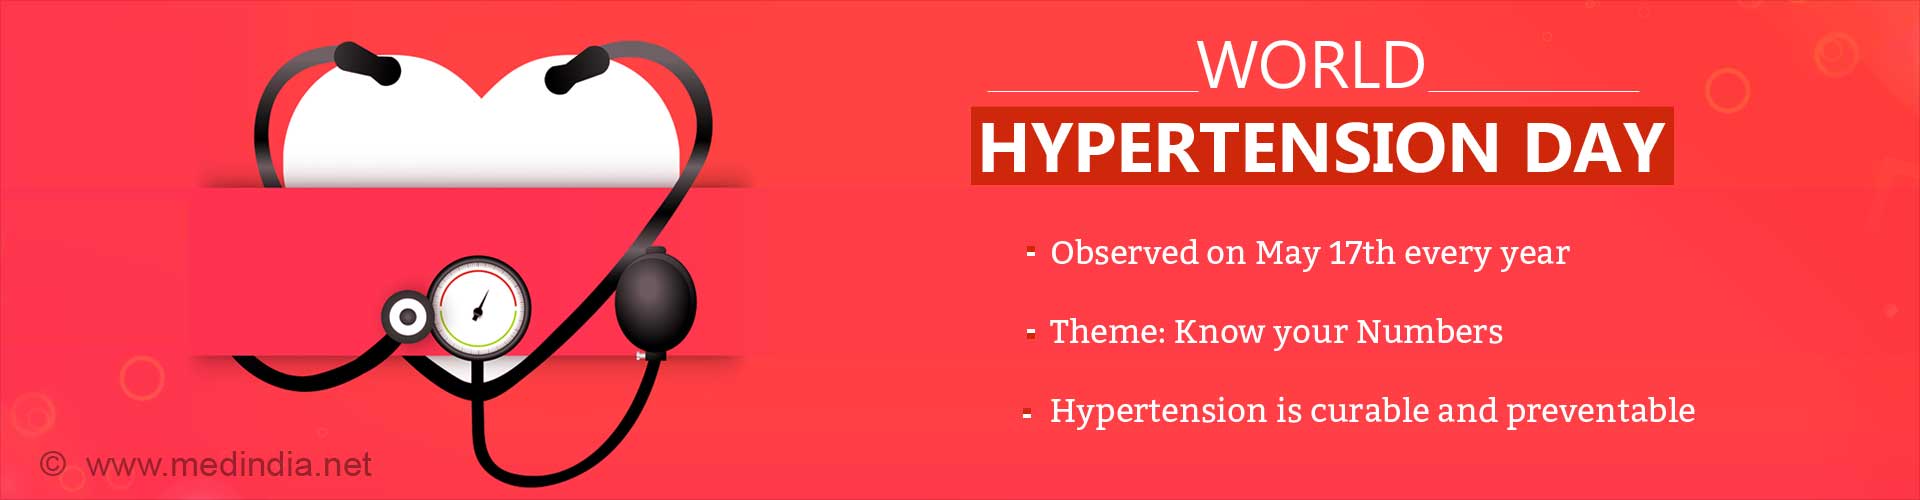 world hypertension day
- observed on may 17 every year
- theme: know your numbers
- hypertension is curable and preventable